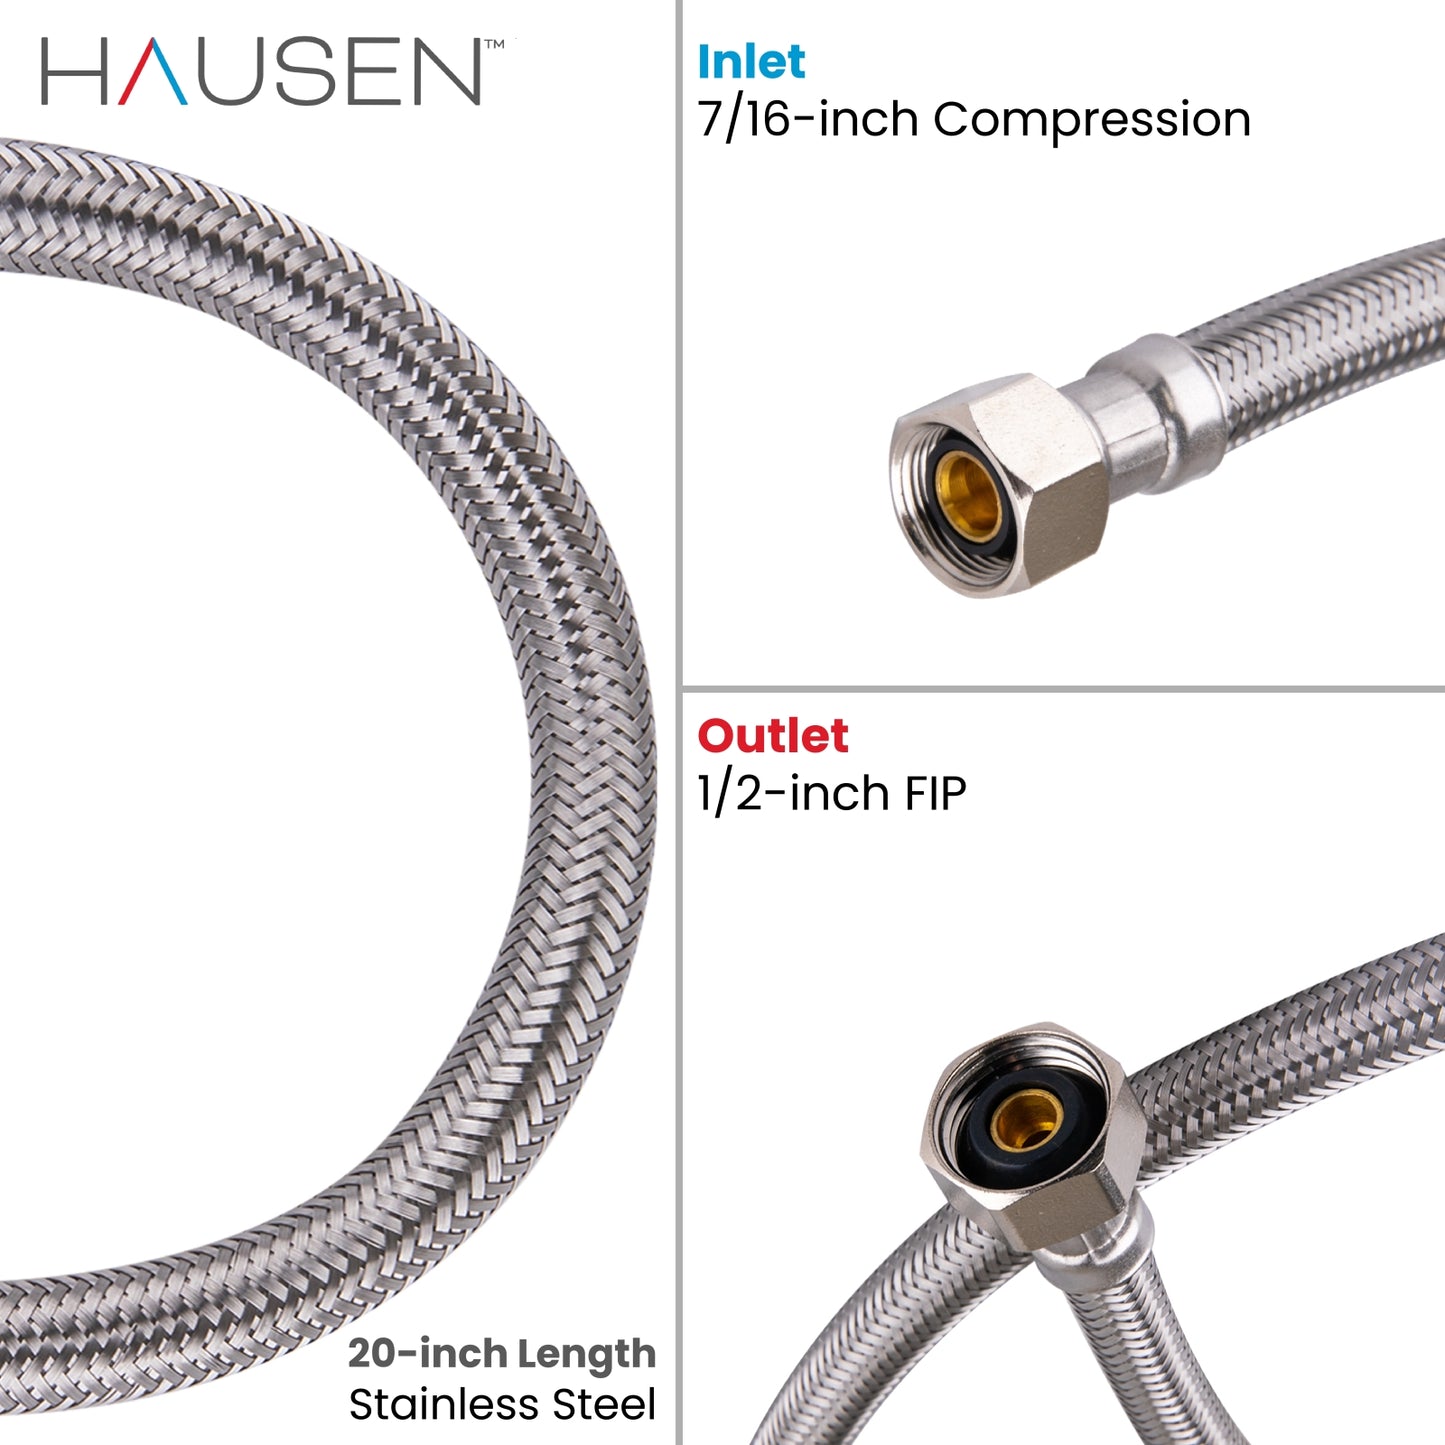 Hausen 7/16-inch Compression x 1/2-inch FIP (Female Iron Pipe) x 20-inch Length Stainless Steel Faucet Water Supply Connector; Lead Free; cUPC and NSF-61 Certified; Compatible with Standard Faucets, 2-Pack